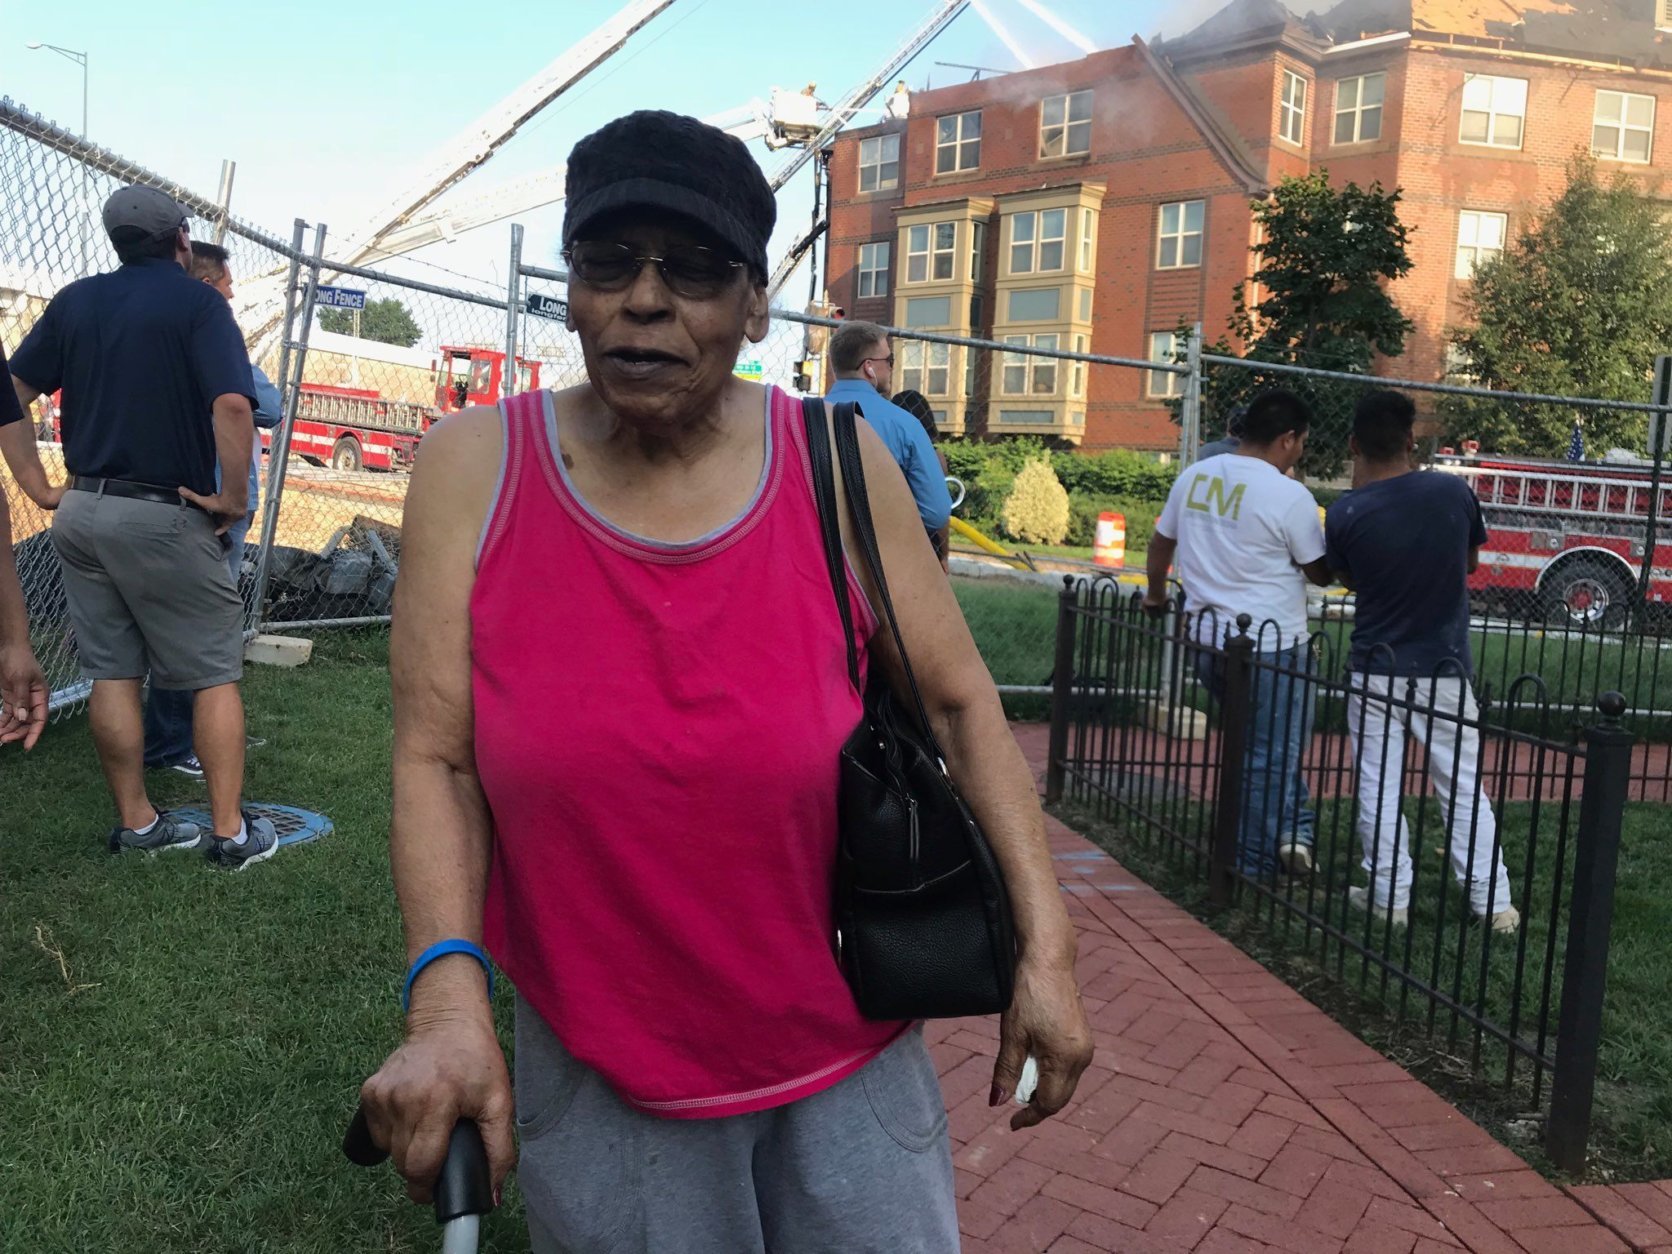 A.V. Jones told WTOP's Dick Uliano that she lives on the second floor of the senior building and never heard a fire alarm go off. (WTOP/Dick Uliano)